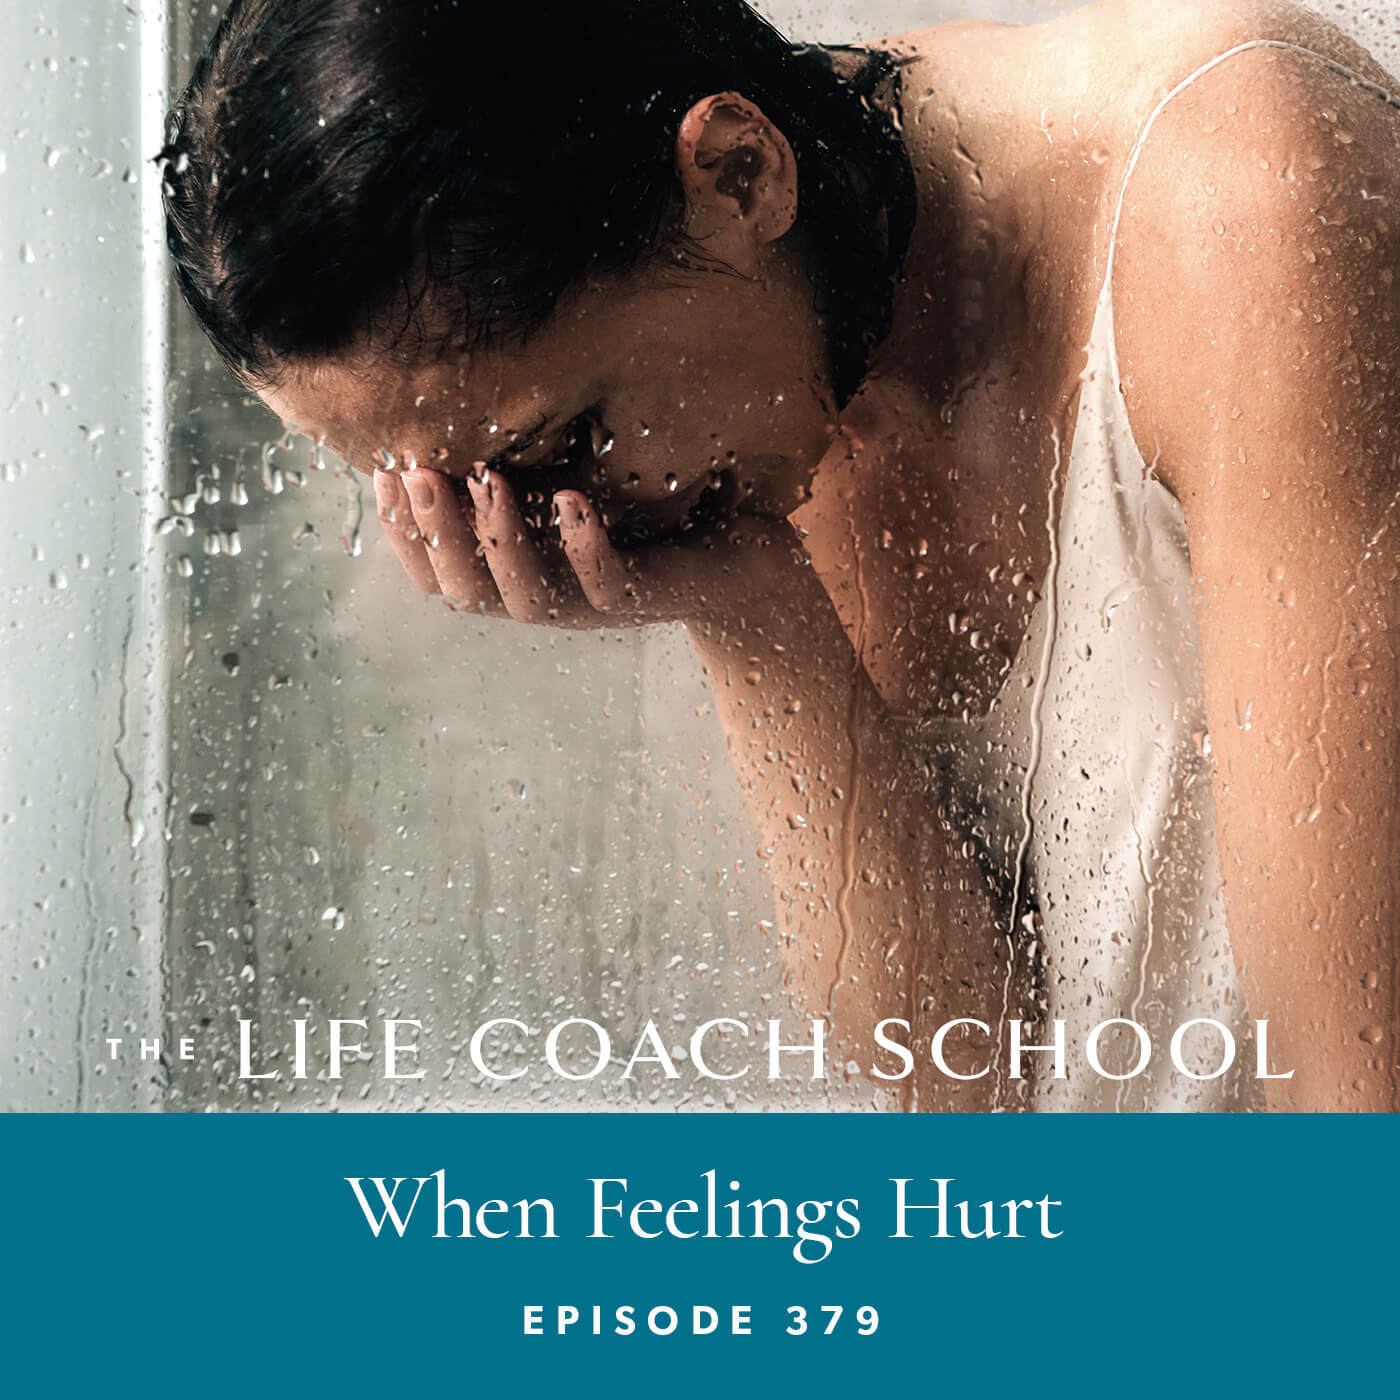 The Life Coach School Podcast with Brooke Castillo | When Feelings Hurt